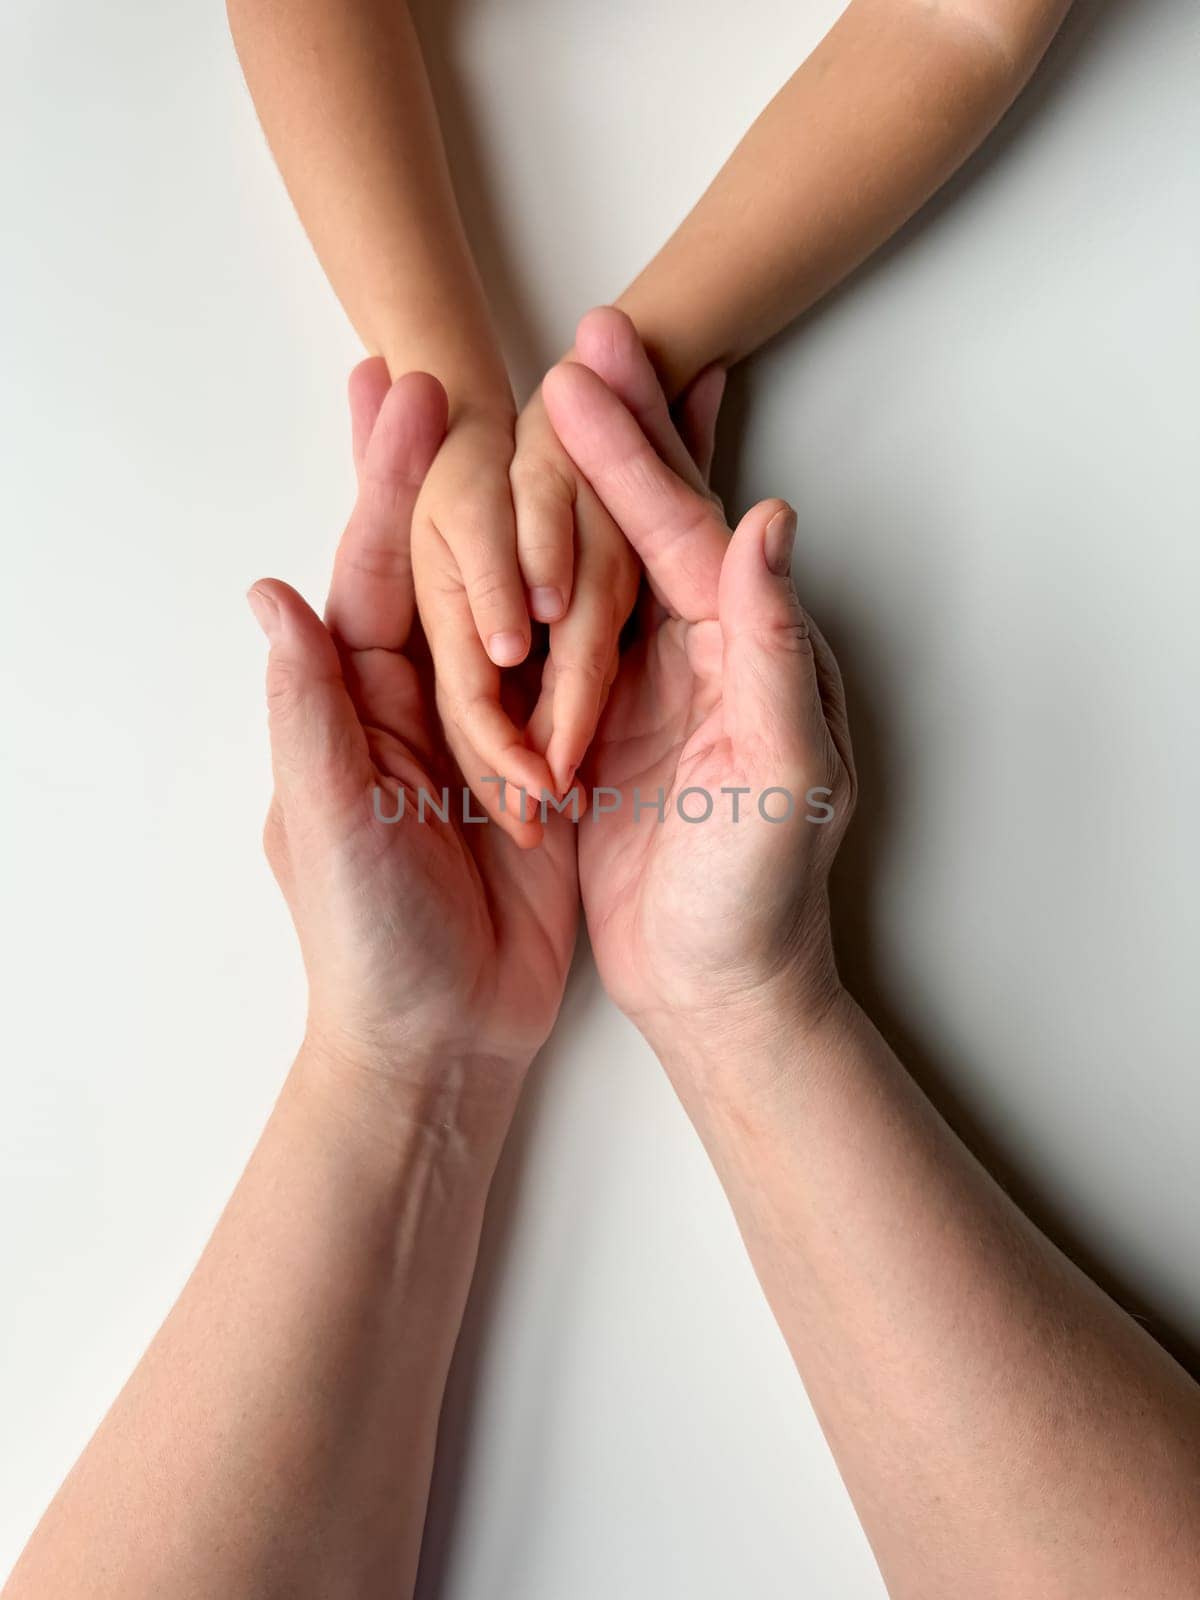 Mothers hands holding childs hands on a white background. by Lunnica